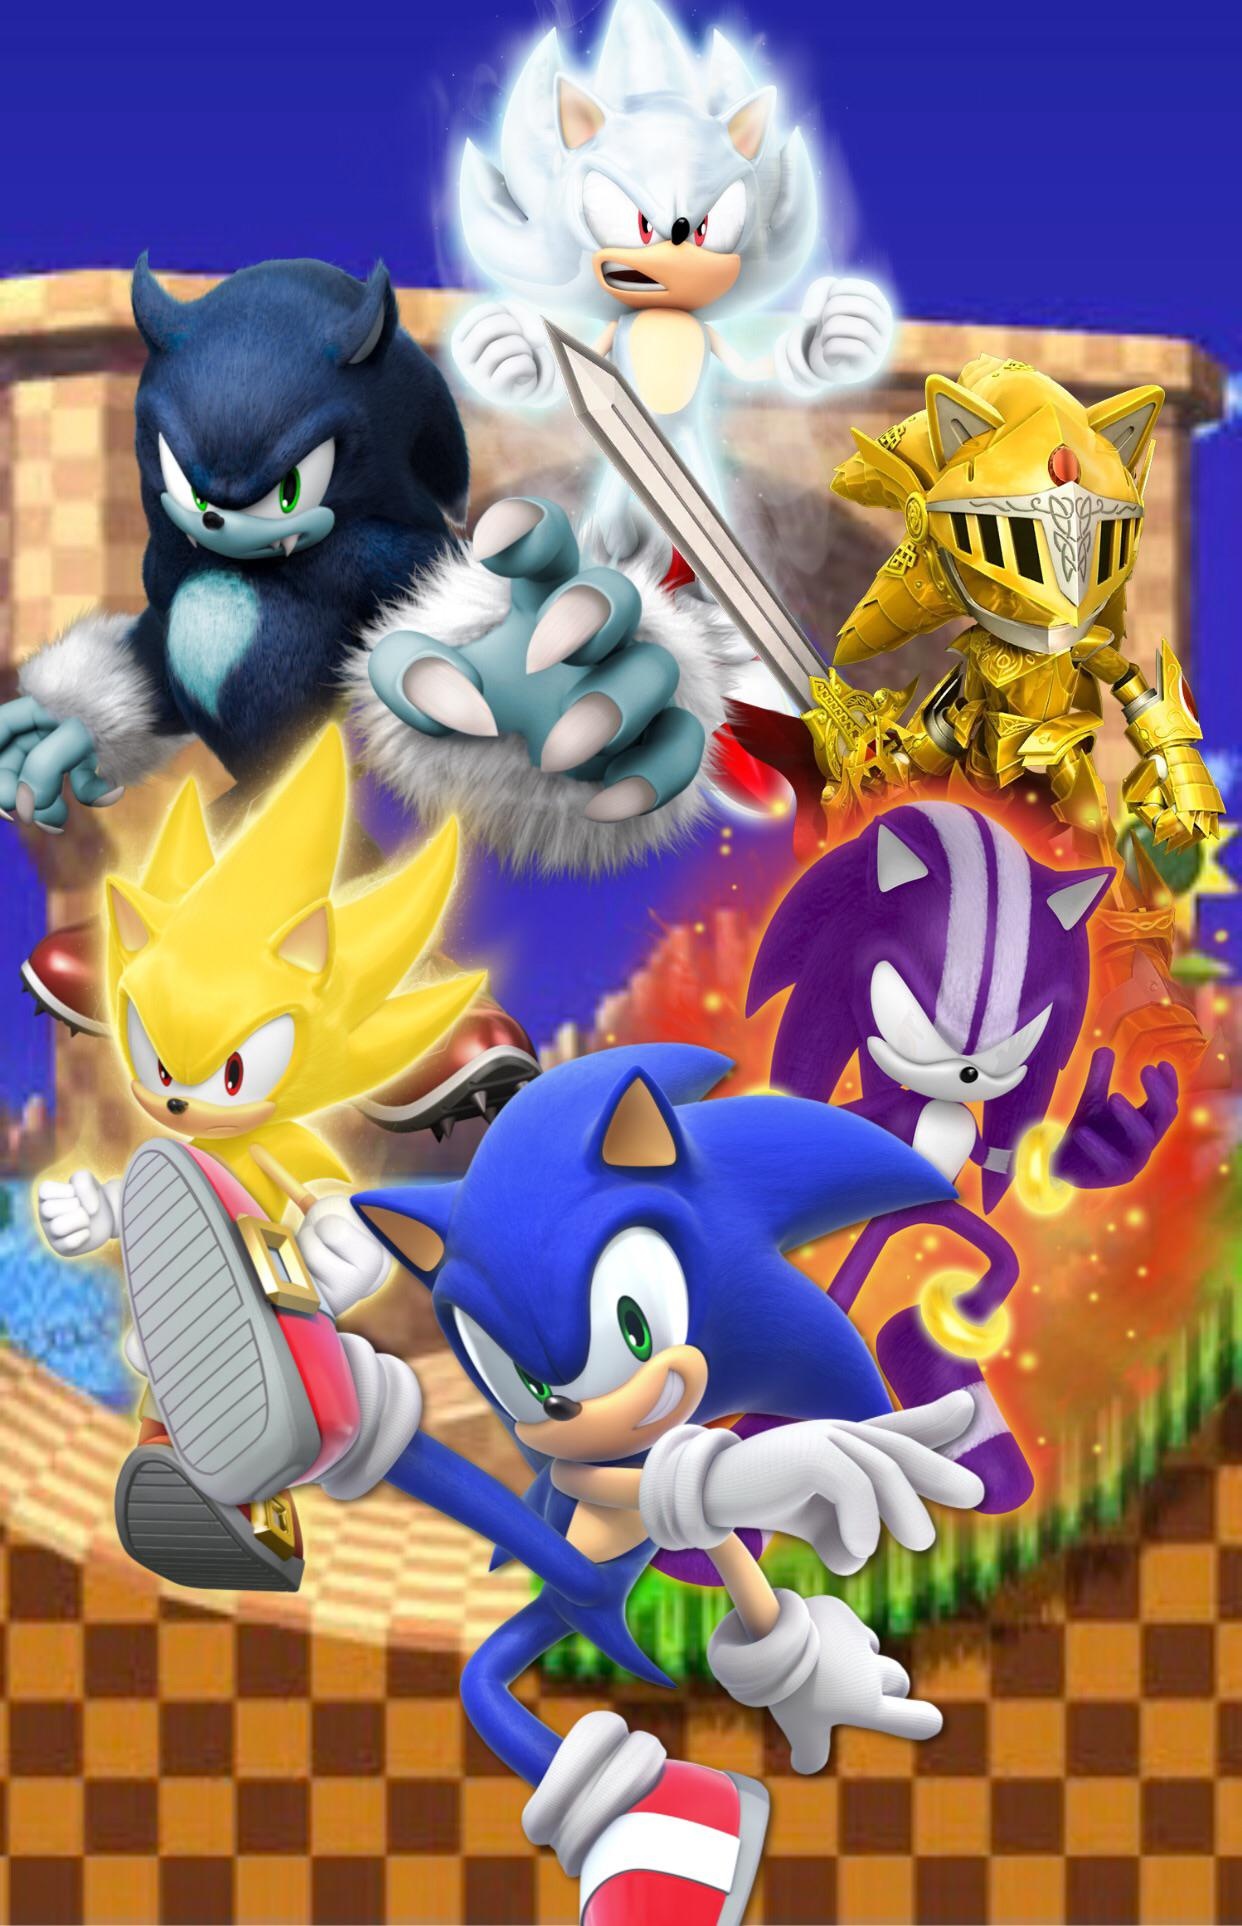 Hyper Sonic, Sonic with Super Sonic wallpapers, Sonic's ultimate power, Sonic's transformations, 1250x1930 HD Handy